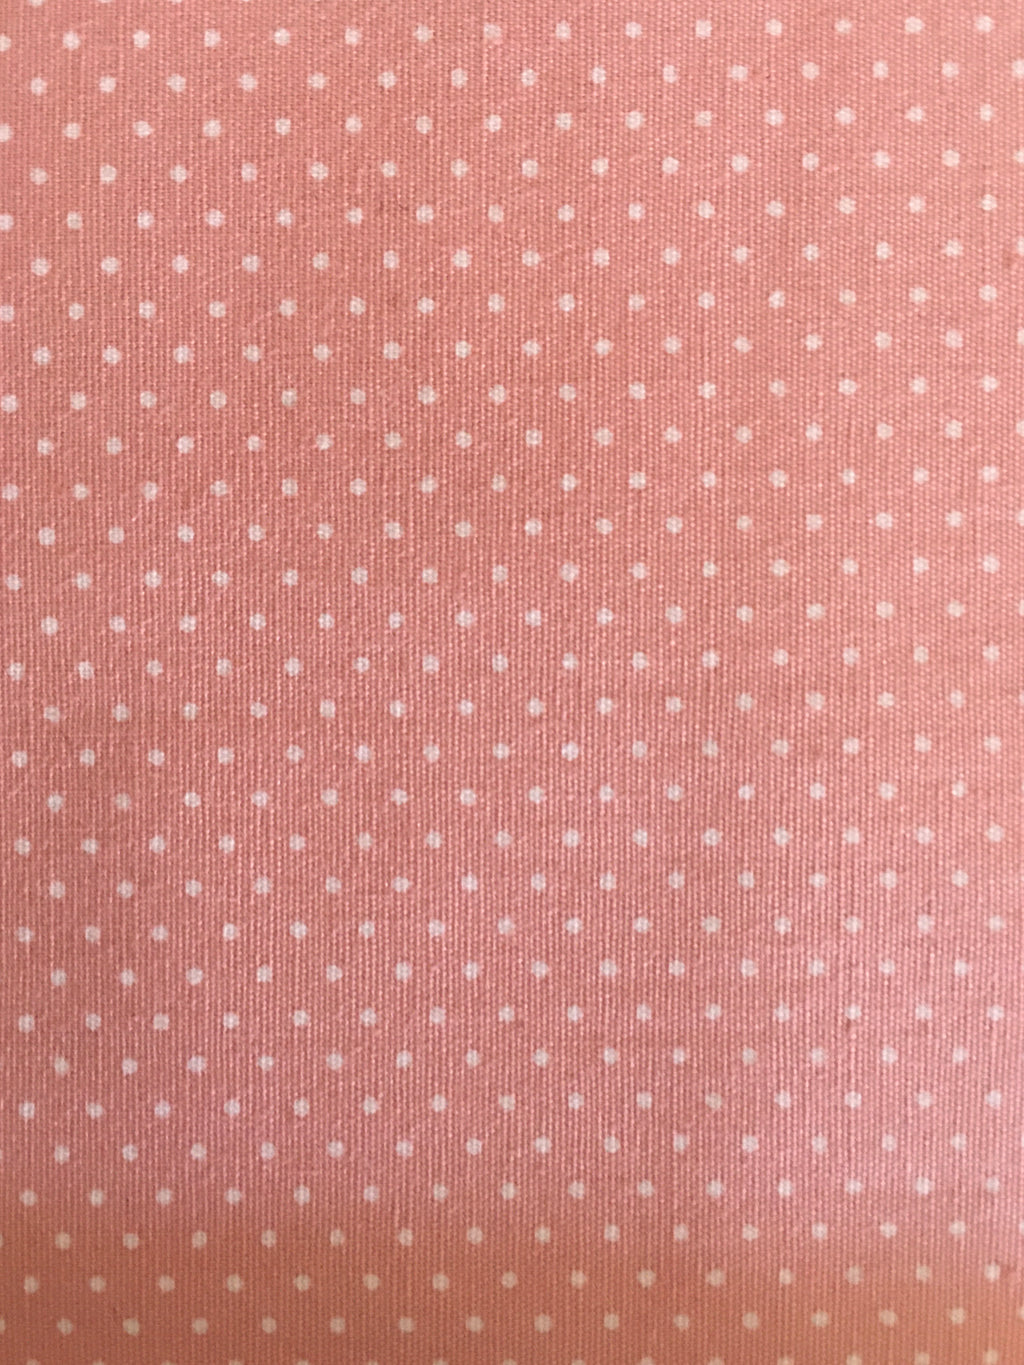 Sevenberry White Micro Dot on Dusty Pink